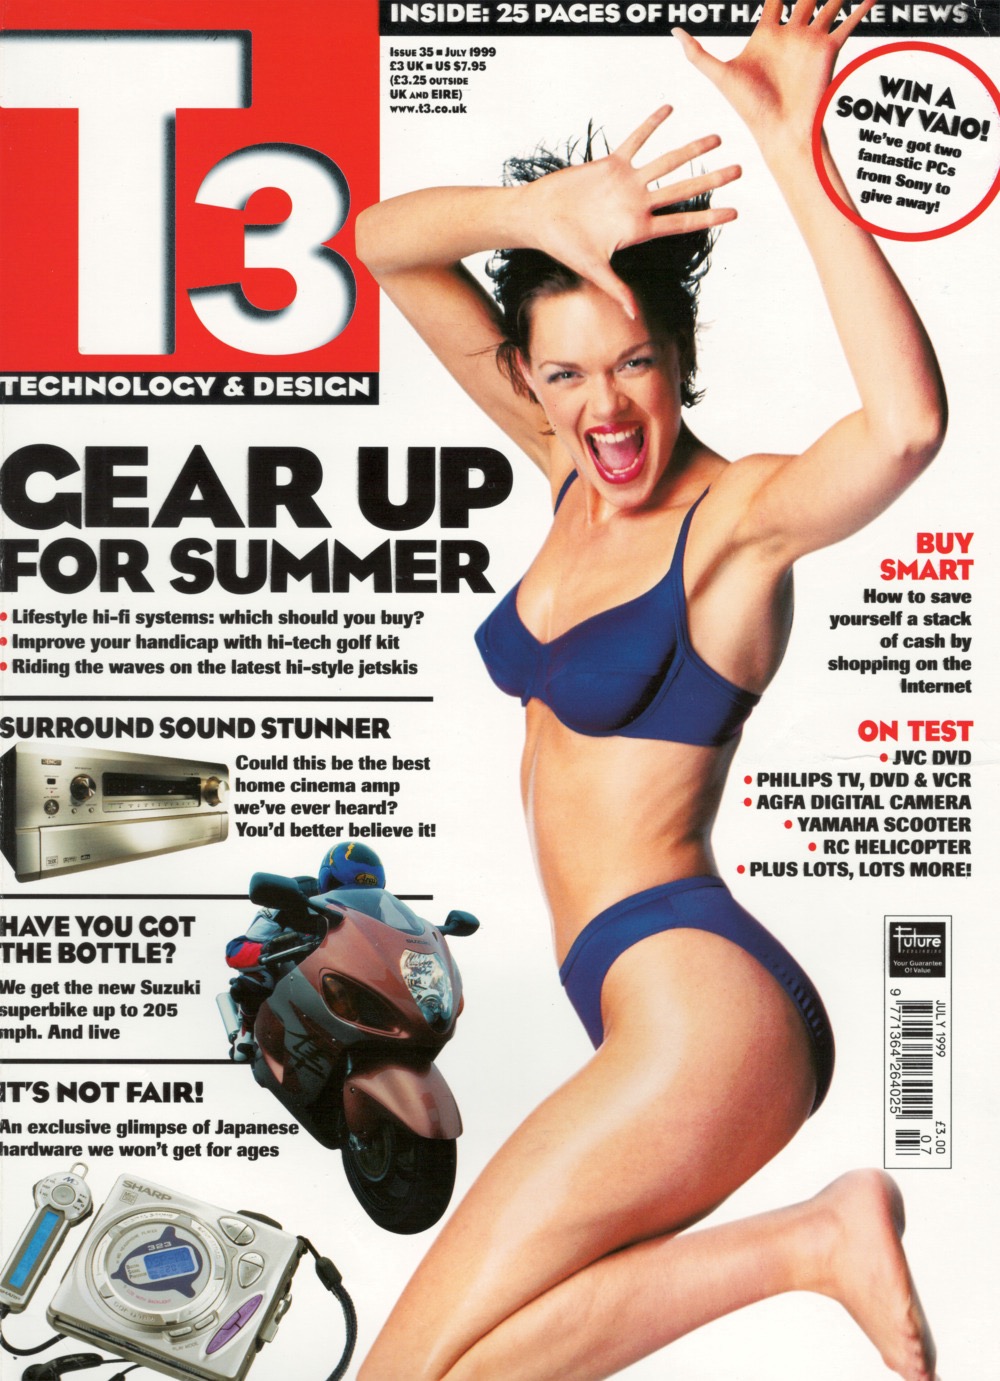 T3 Issue 35